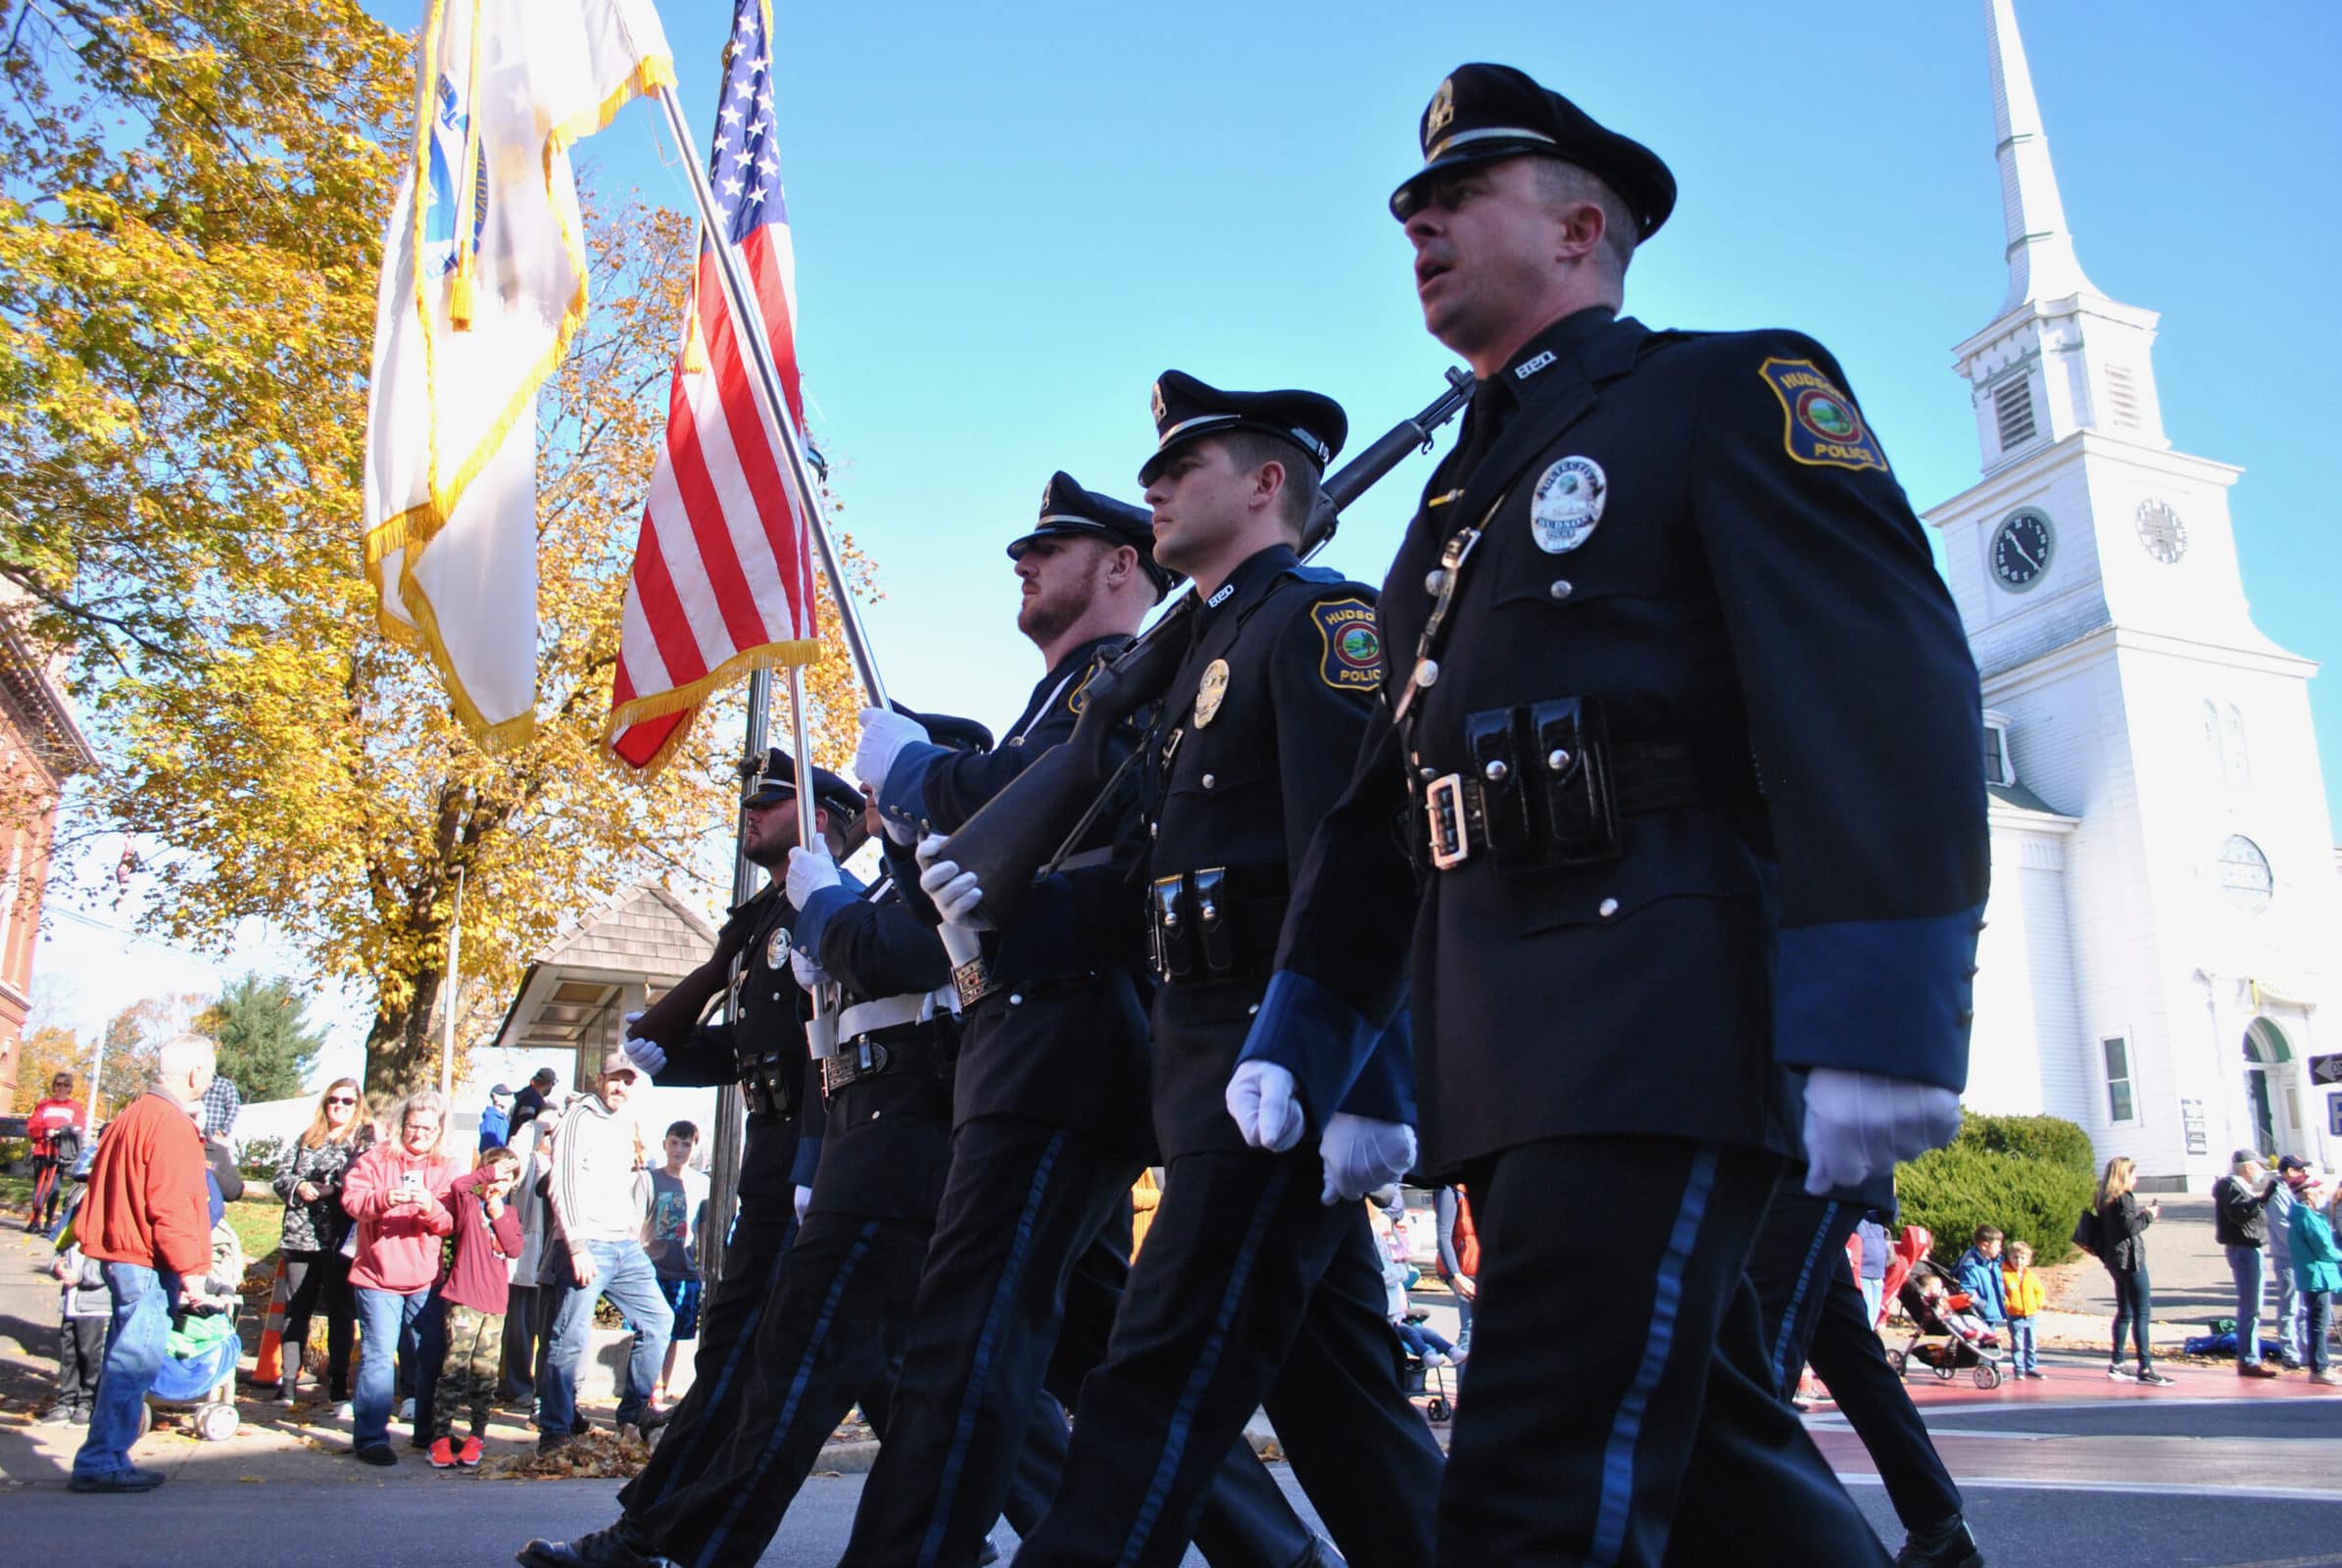 Low angle view of a police color guard marching. One is carrying a flag. Three are carrying ceremonial rifles.